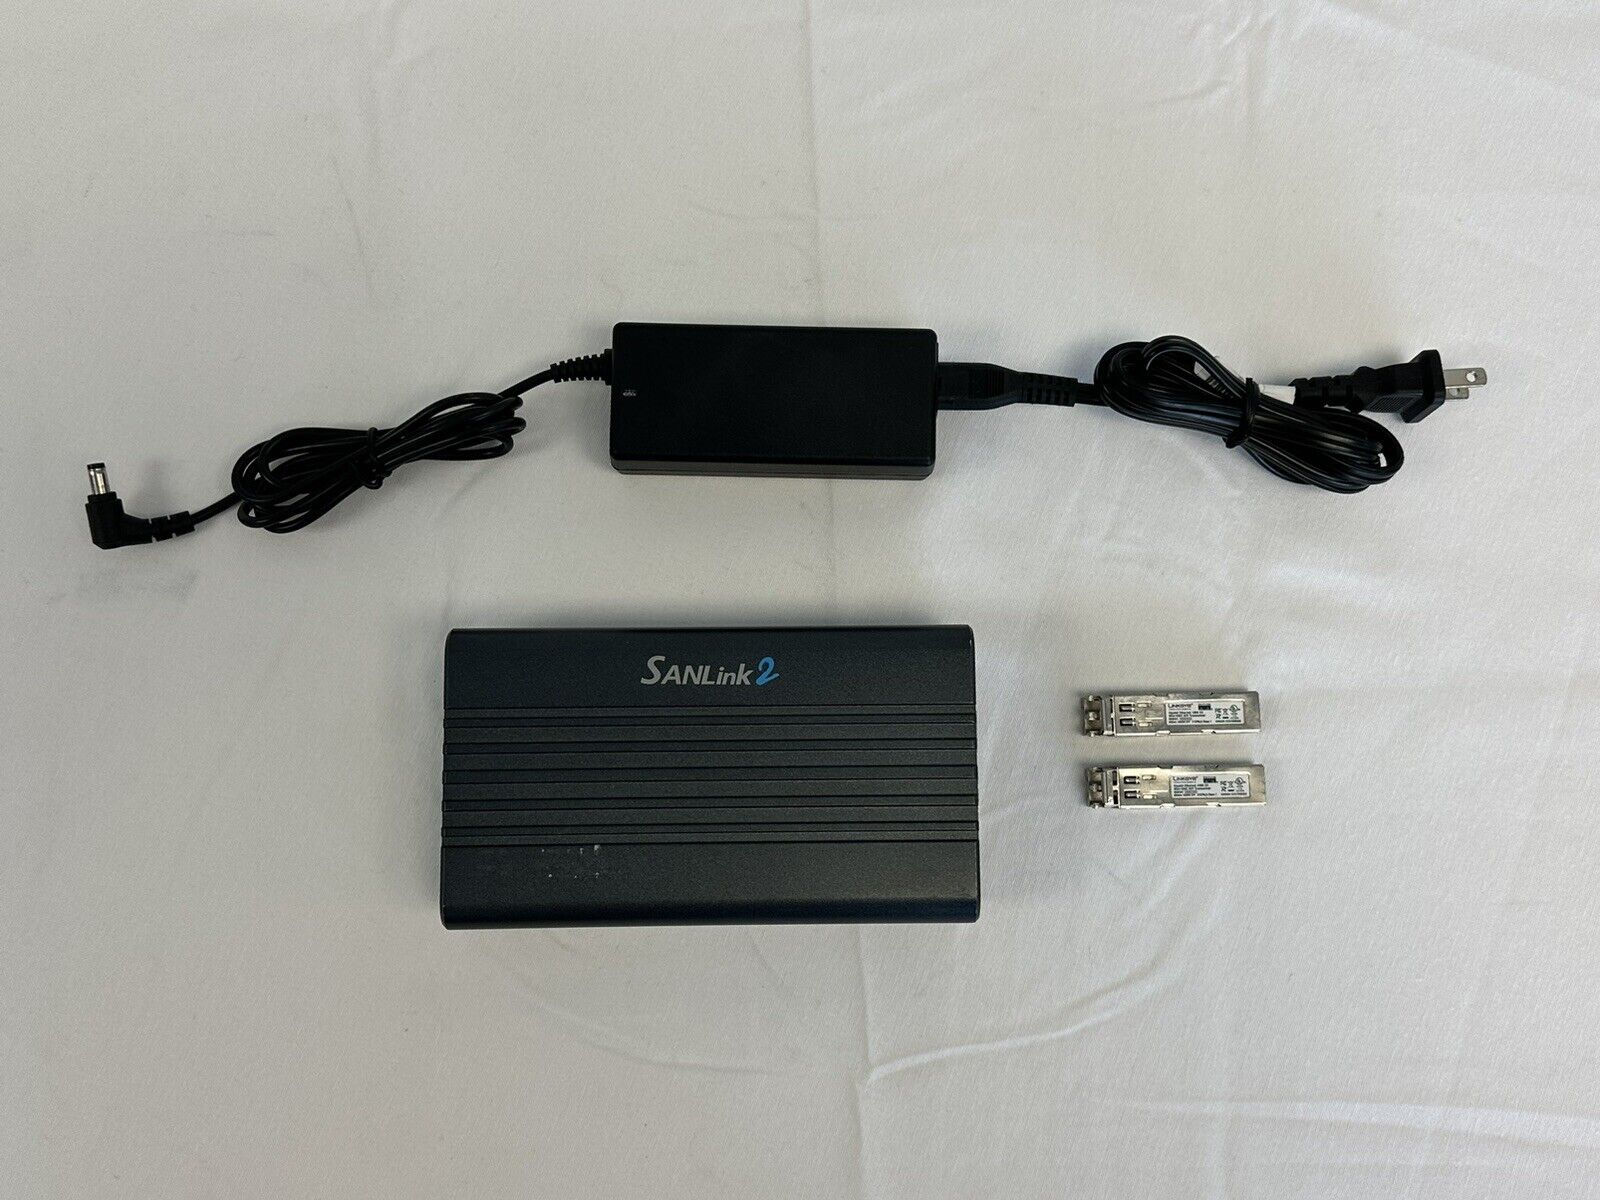 Promise Technology Sanlink 2 F2102 Thunderbolt 2 To 8gb/s Adapter w/Power Supply